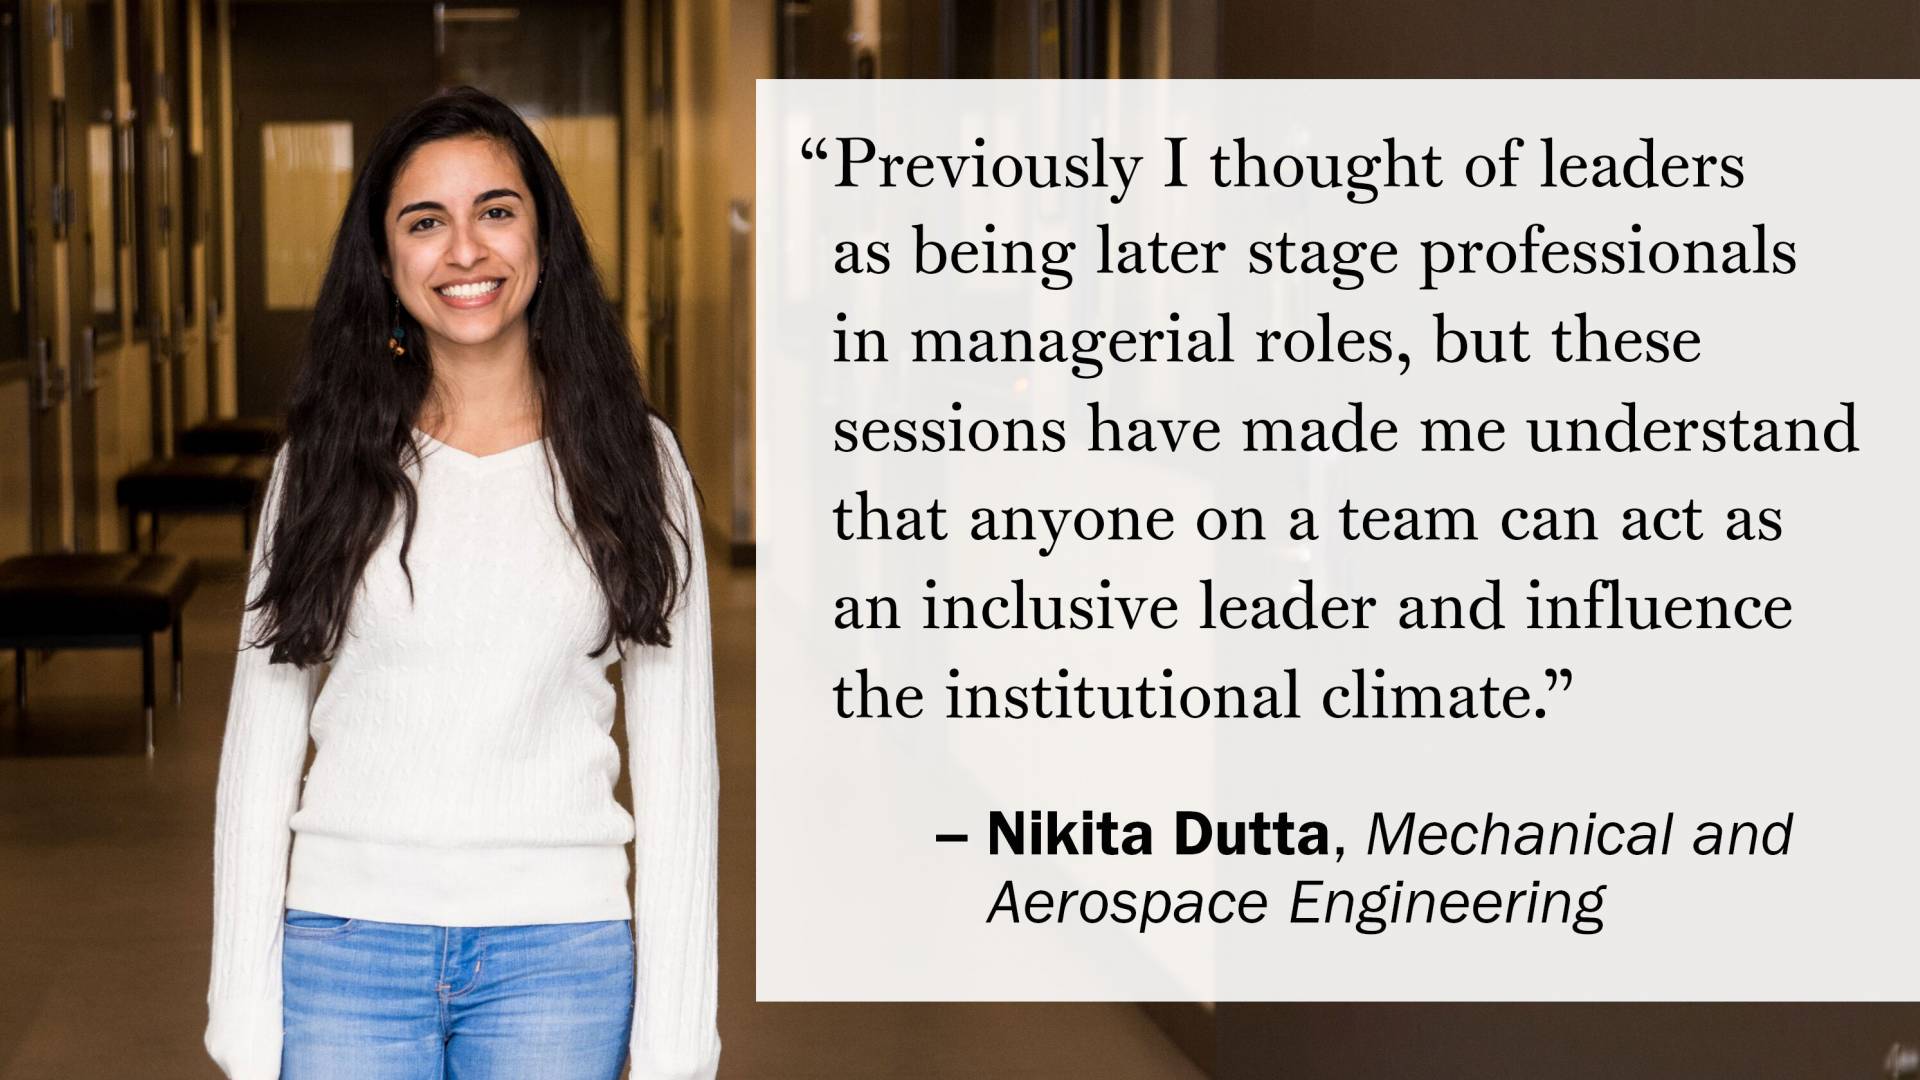 "Previously I thought of leaders as being later stage professionals in managerial roles, but these sessions have made me understand that anyone on a team can act as an inclusive leader and influence the institutional climate." —Nikita Dutta, Mechanical and Aerospace Engineering